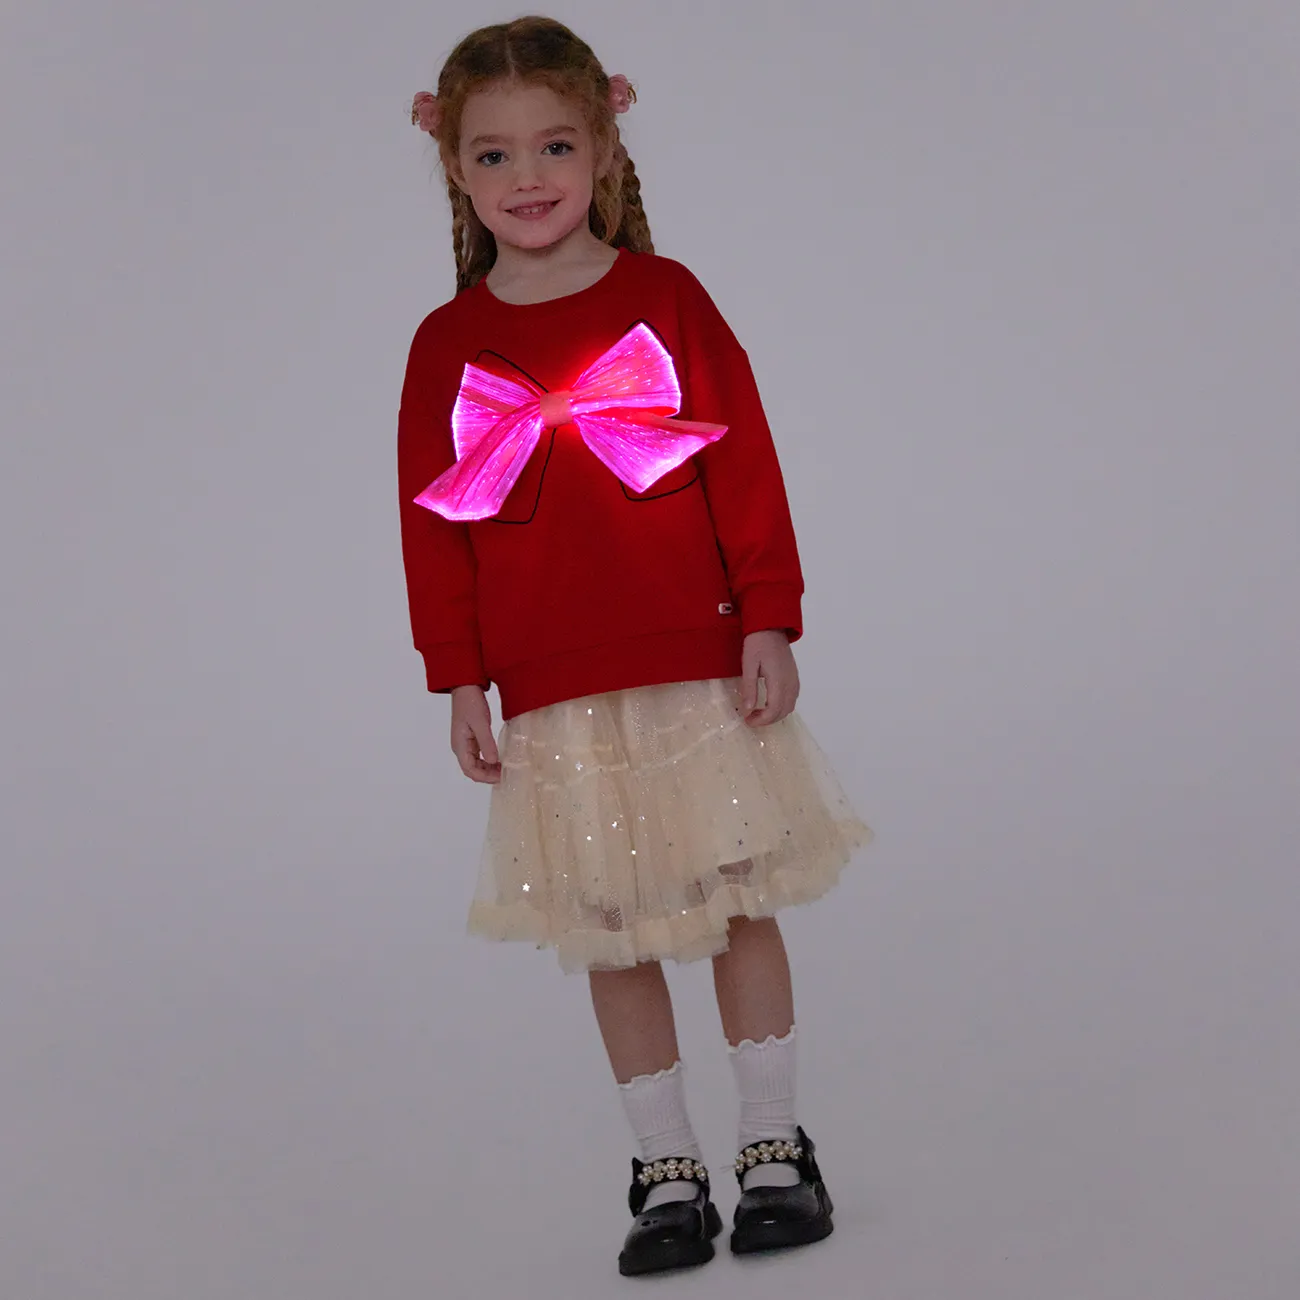 Go-Glow Illuminating Sweatshirt with Light Up Removable Bow Including Controller (Built-In Battery) Red big image 1